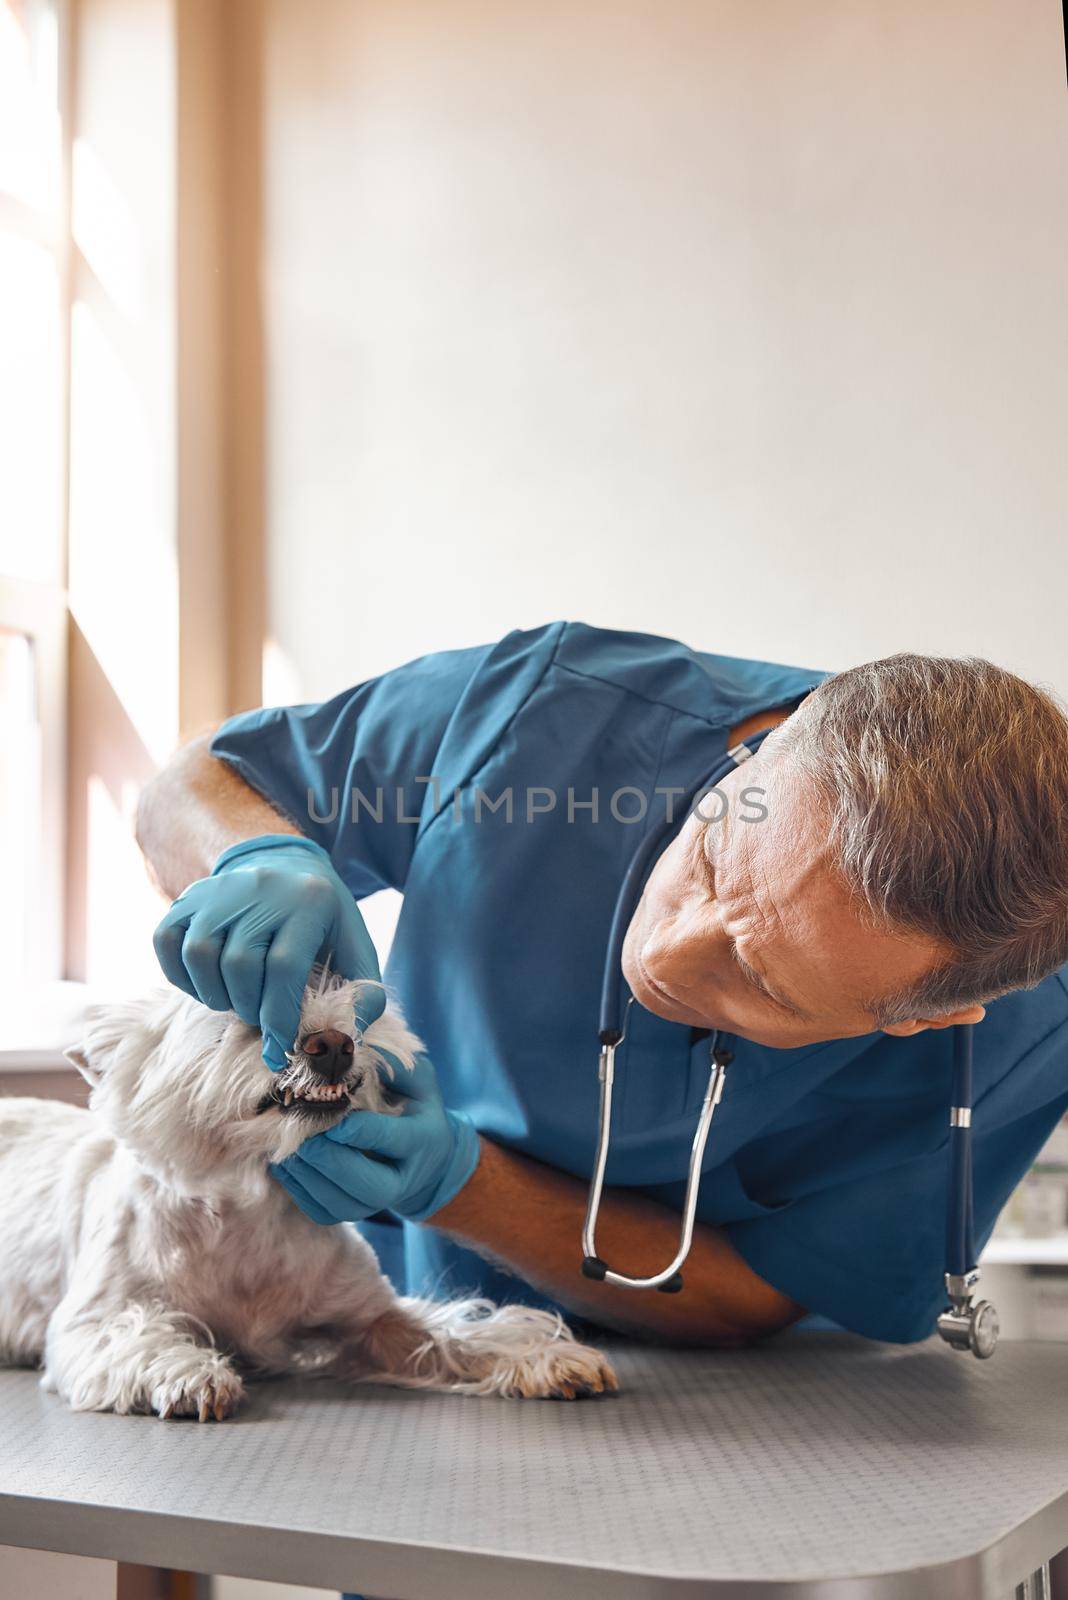 Just two minutes. Kind veterinarian in work uniform and protective gloves checking teeth of a small dog lying on the table in veterinary clinic by friendsstock